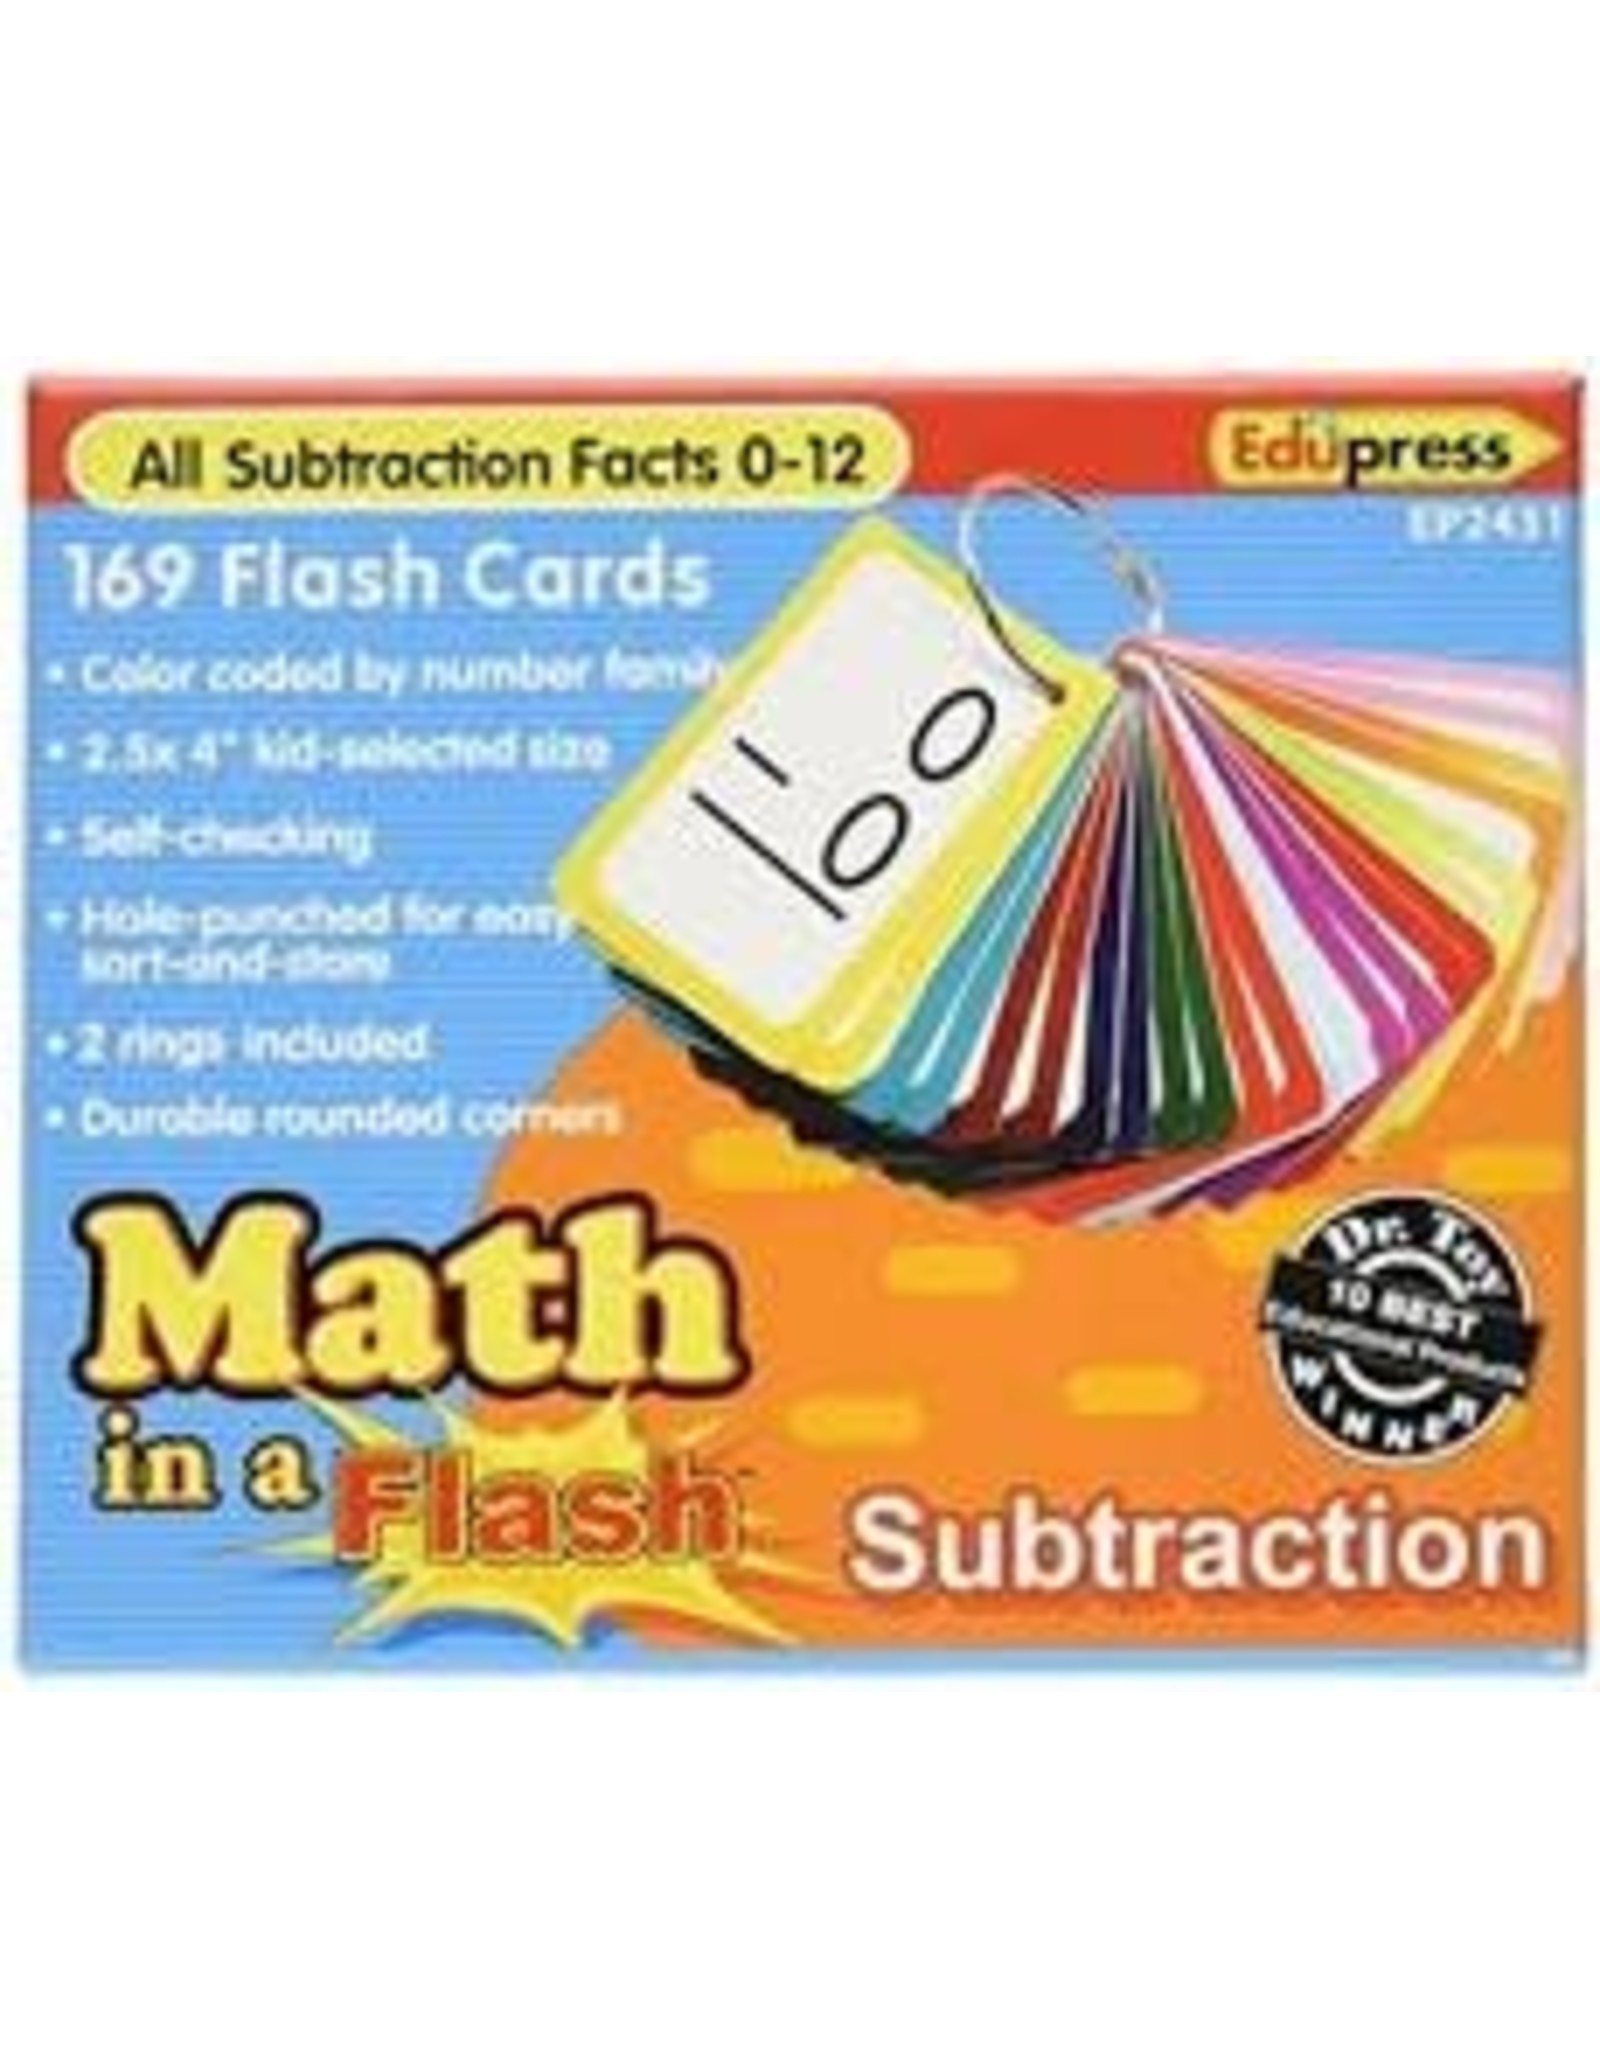 Flash Cards Subtraction